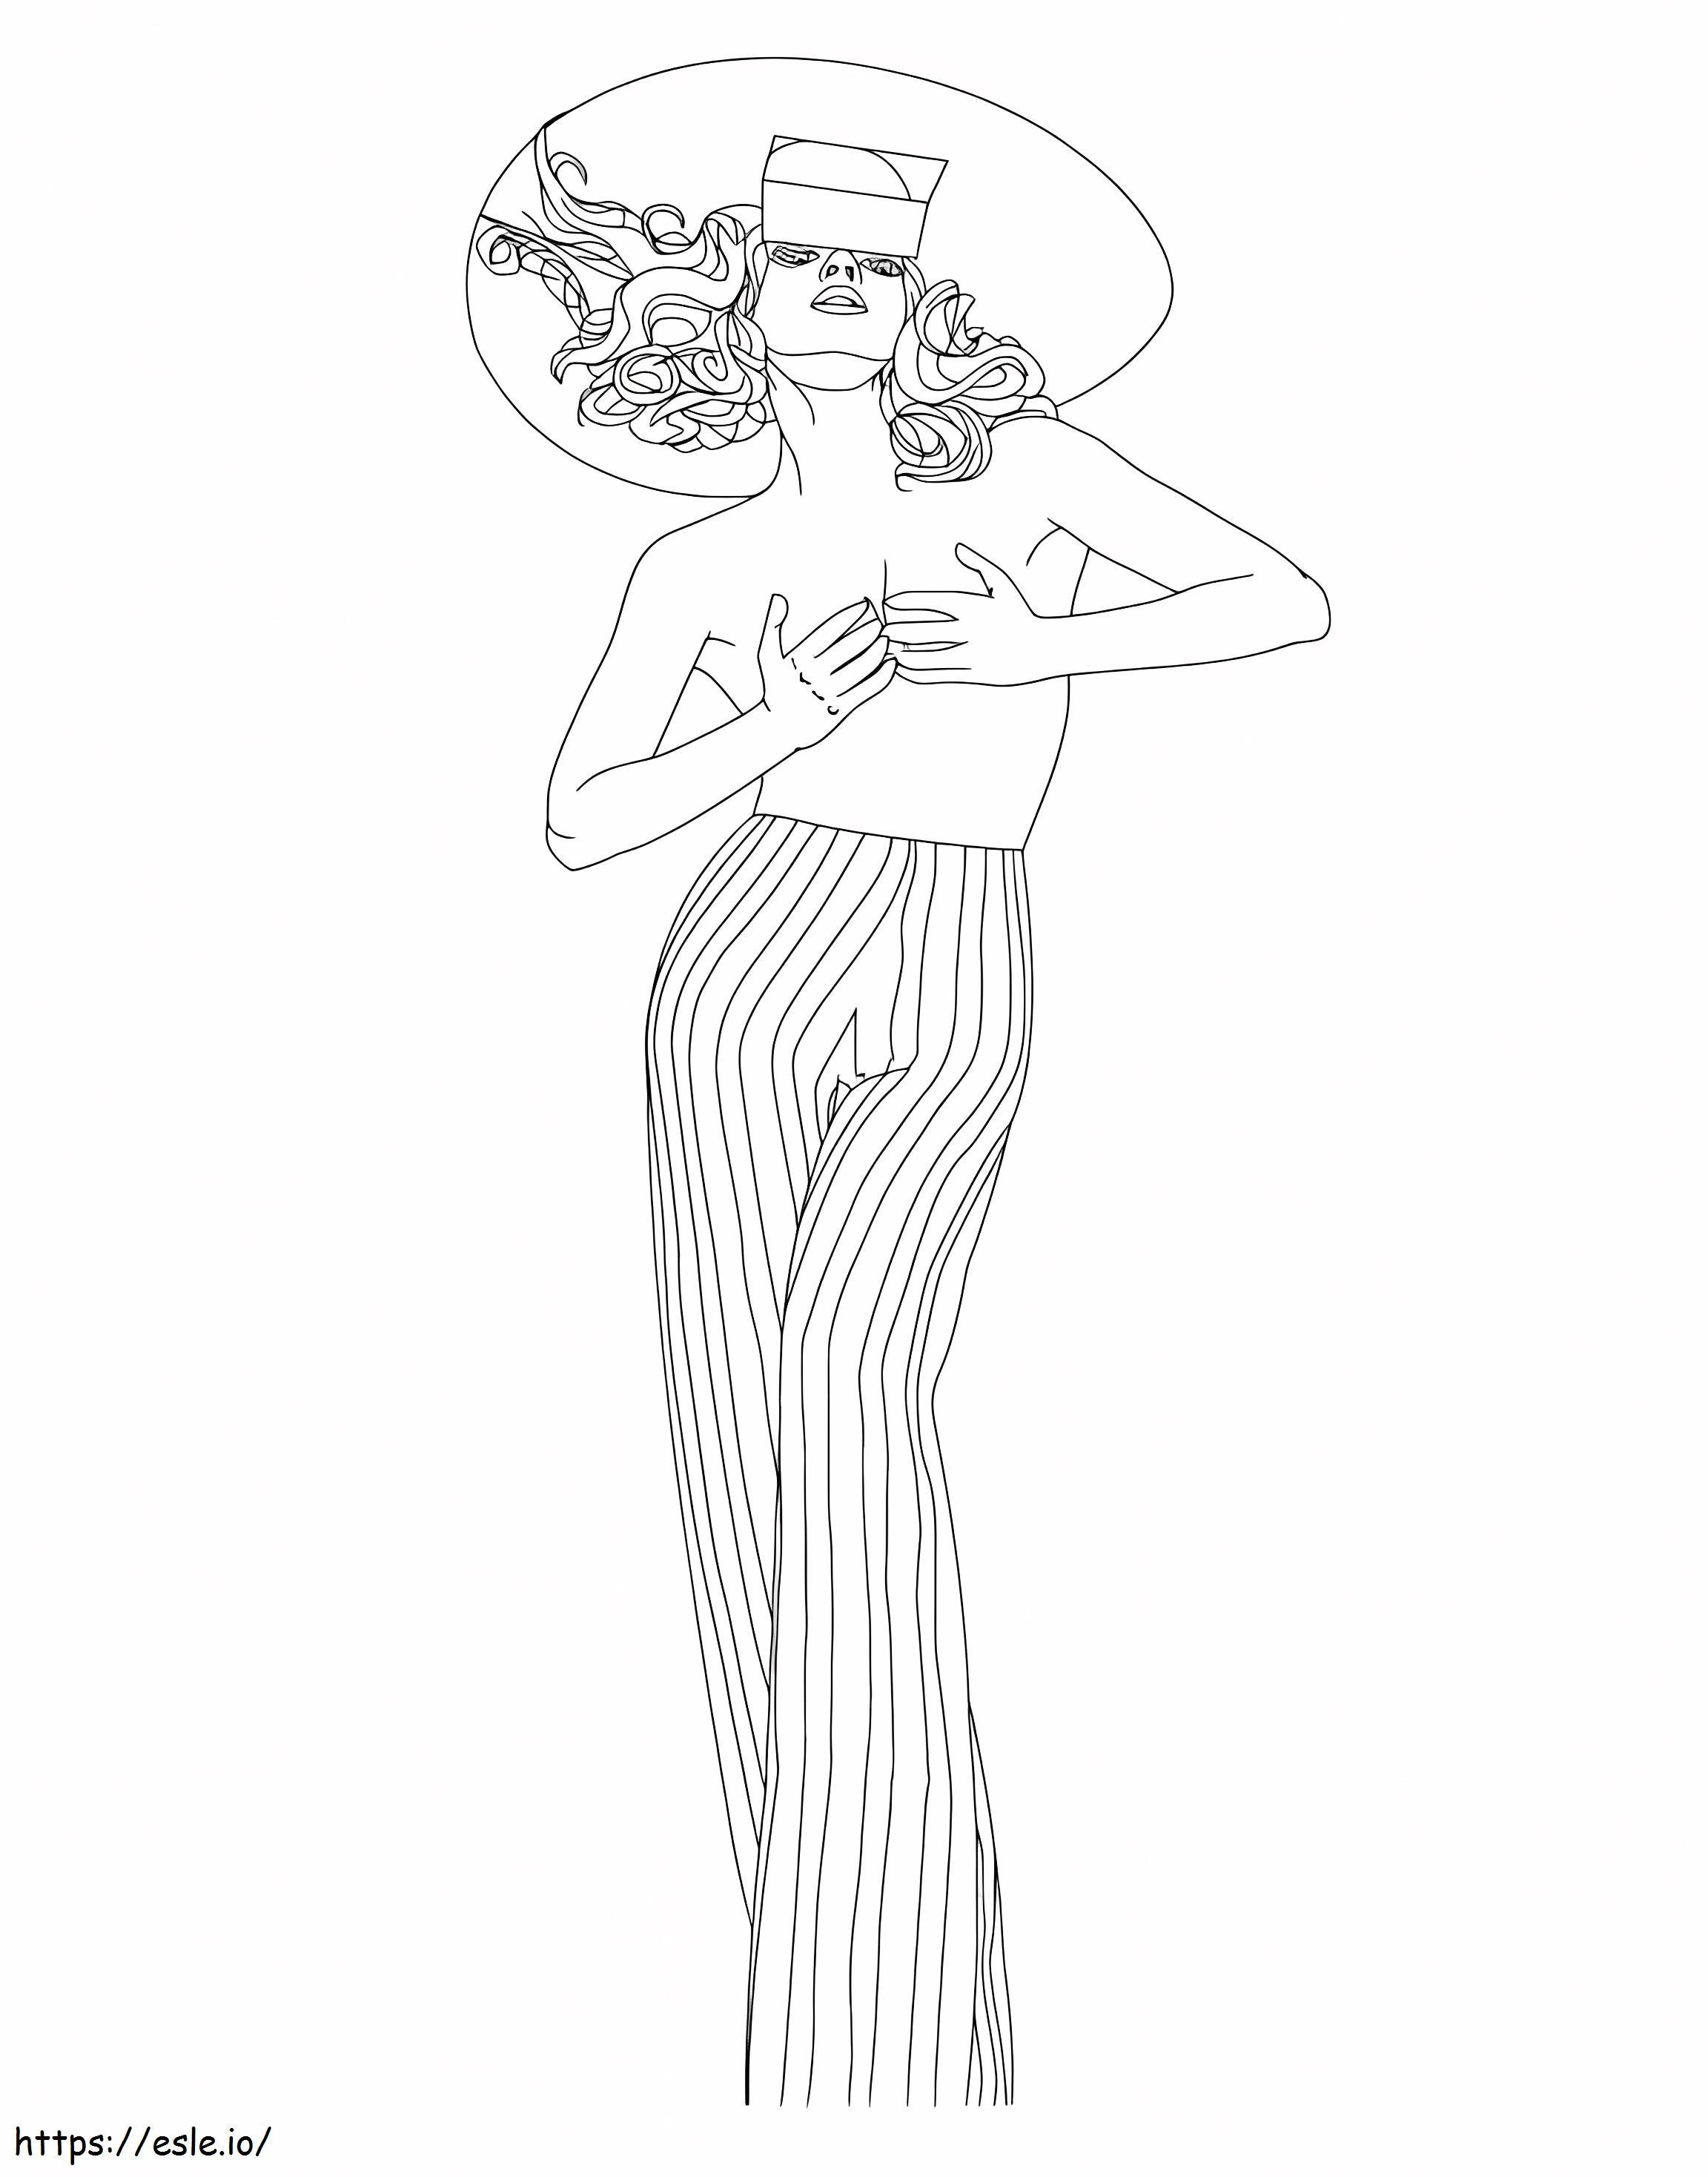 Famous Singer Lady Gaga coloring page